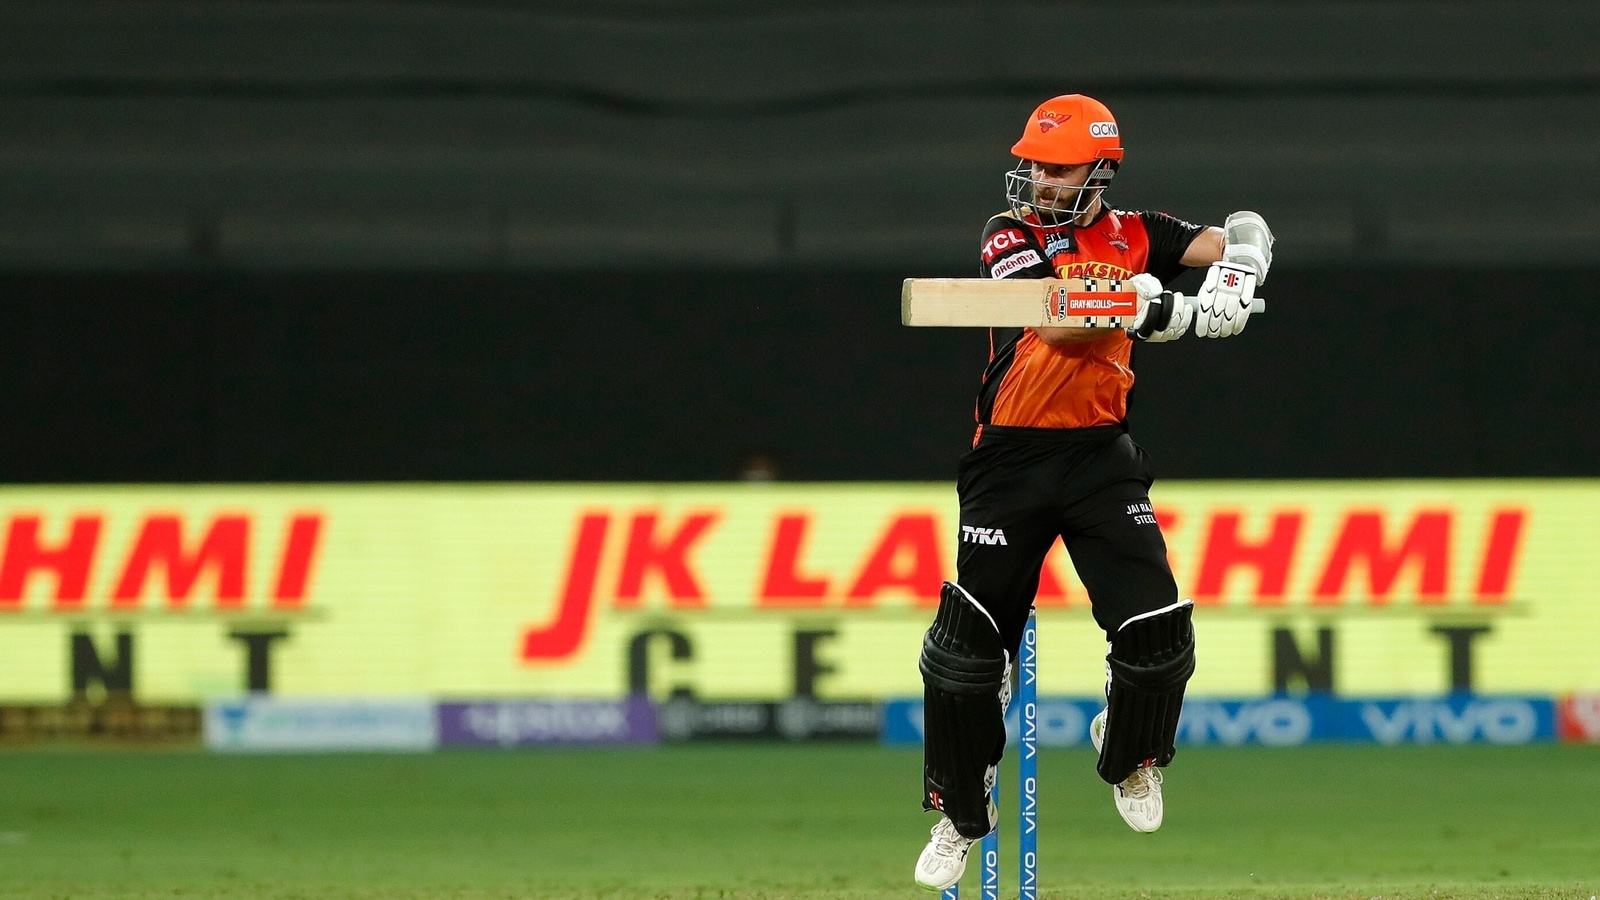 We need to improve, back to drawing board': Kane Williamson after SRH get  knocked out of IPL 2021 | Cricket - Hindustan Times